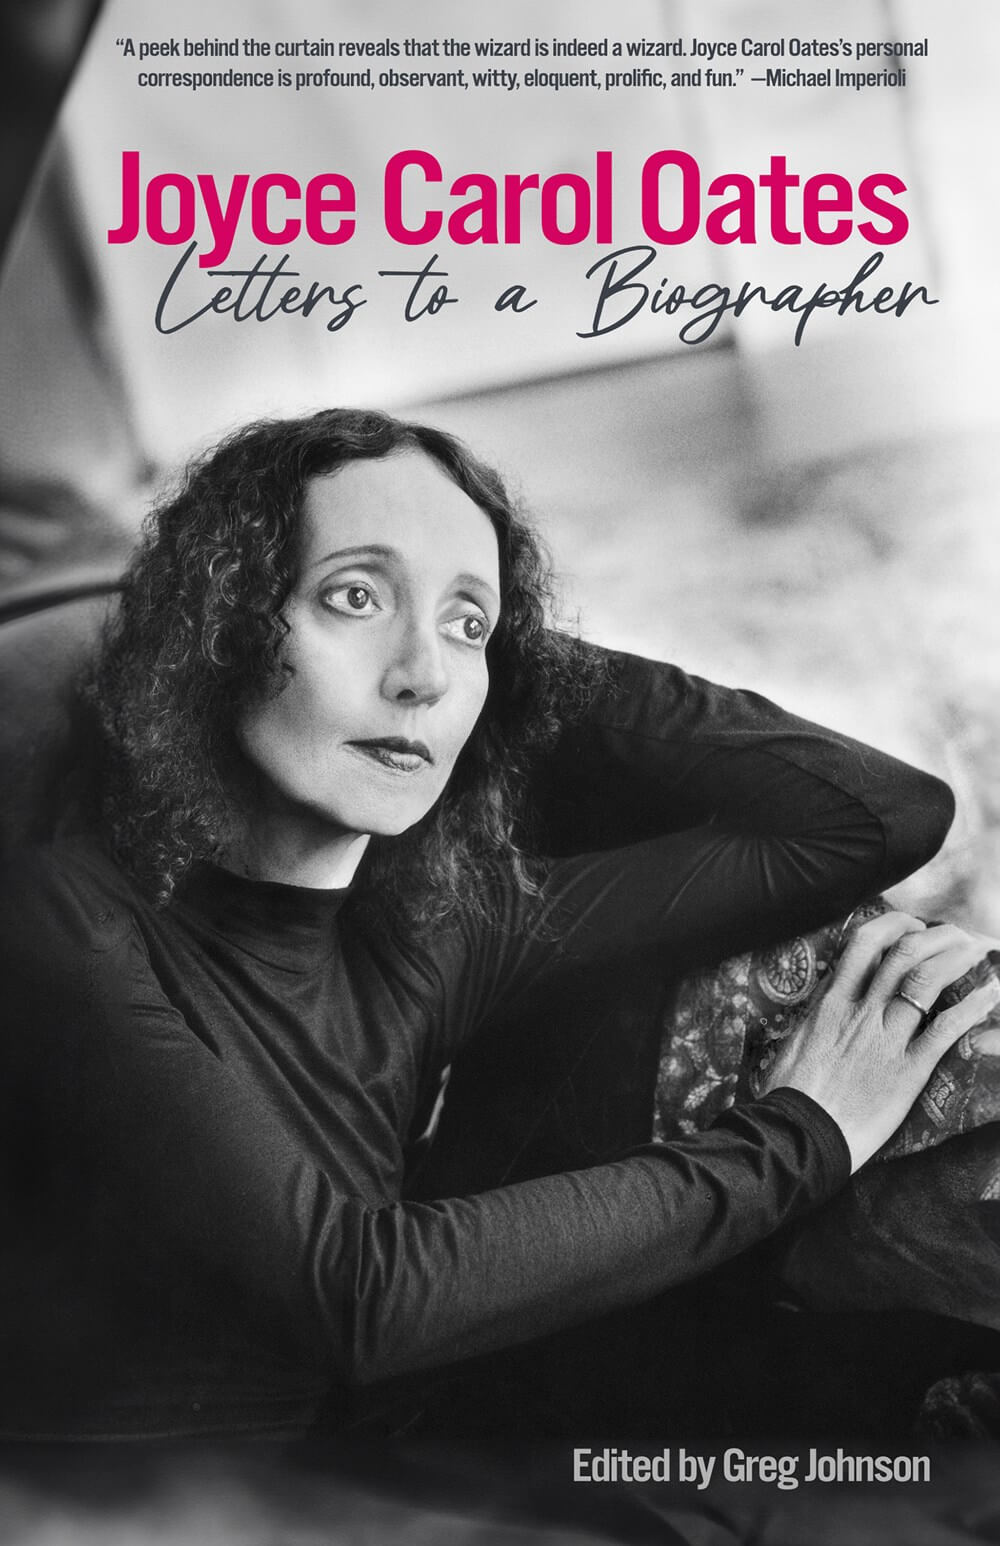 The cover for 'Letters to a Biographer'.